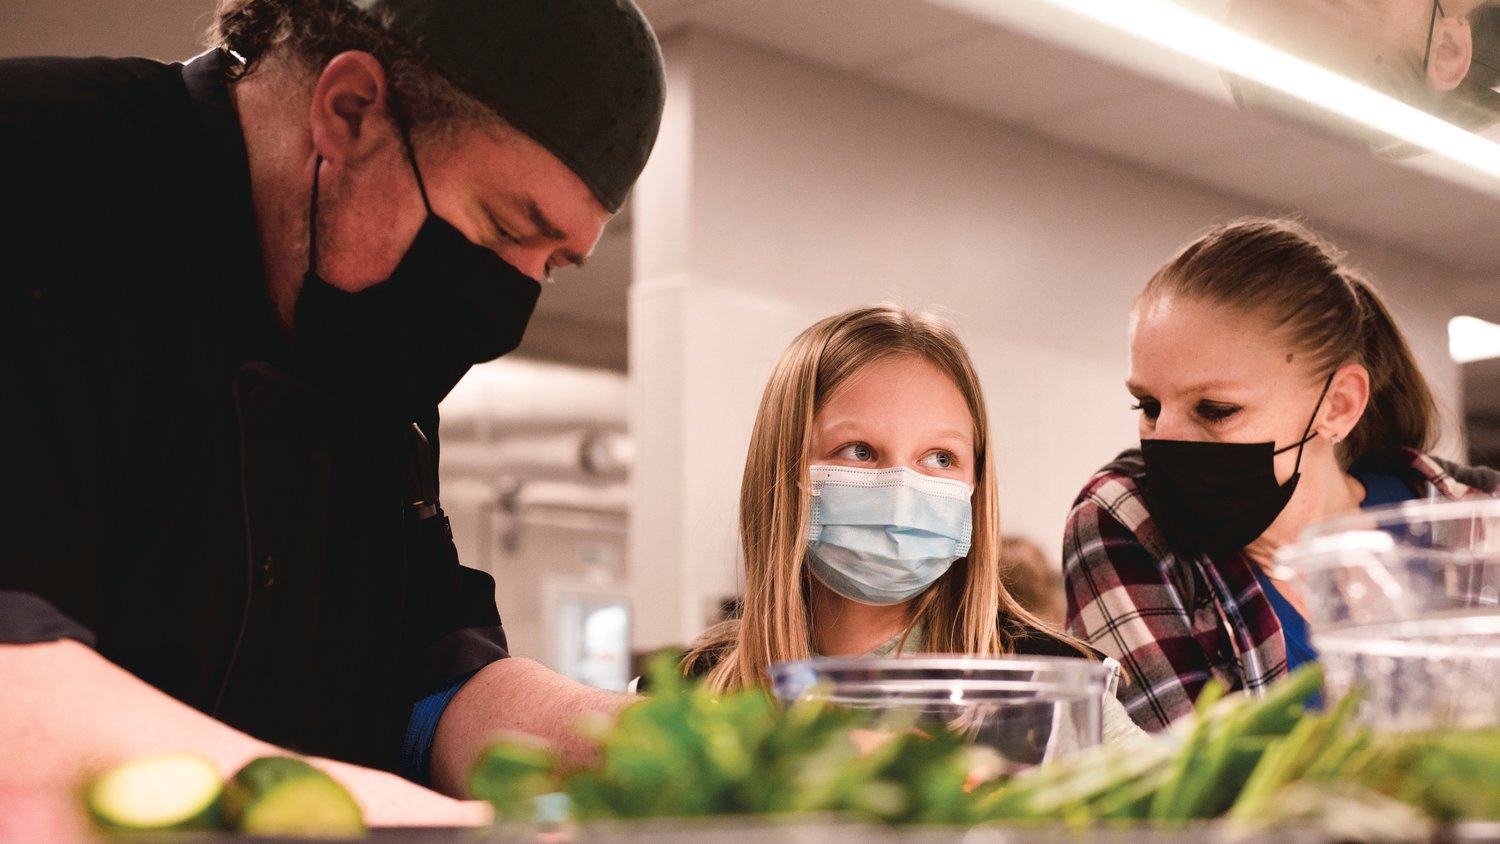 Students in the Future Chef program work with professionals to prepare dishes for judges based on recipes they create Monday at Orin C. Smith Elementary in Chehalis.